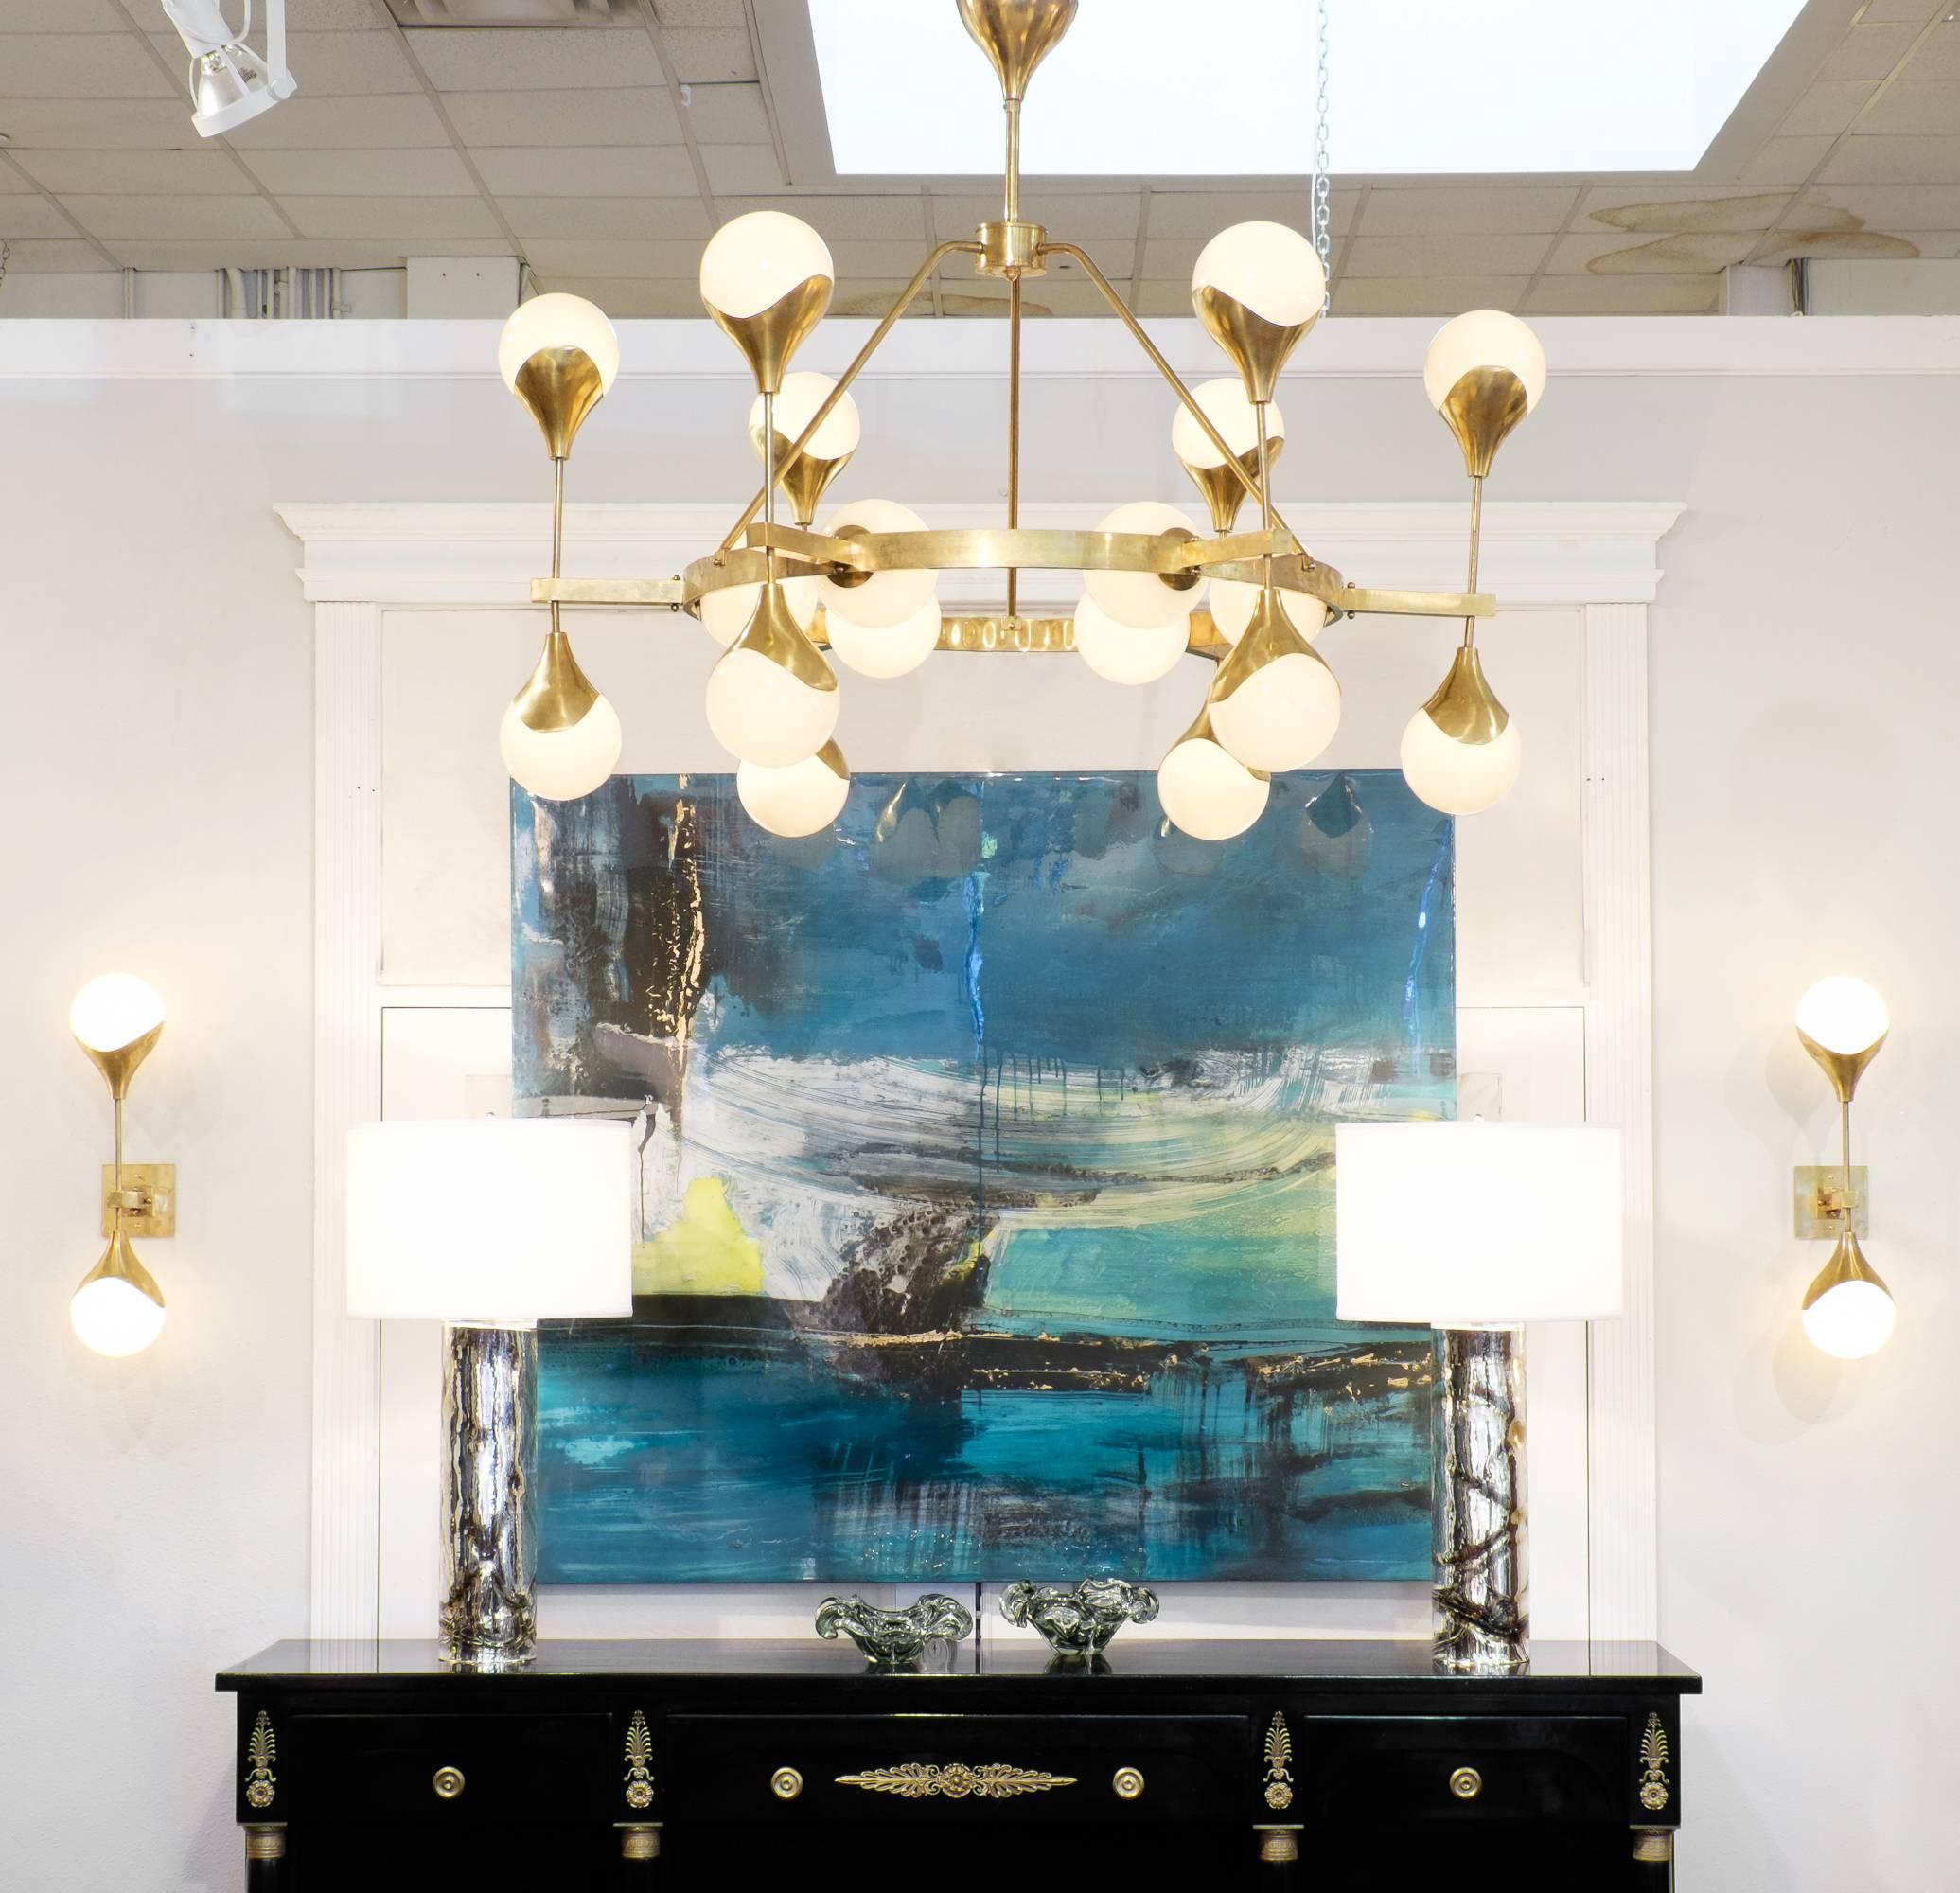 Italian pair of Mid-Century Modern style sconces in brass with pearl translucent glass shades. These wall sconces are a statement piece, radiating beauty on or off. Each sconce requires two candelabra-base bulbs, and is wired to fit US standards.